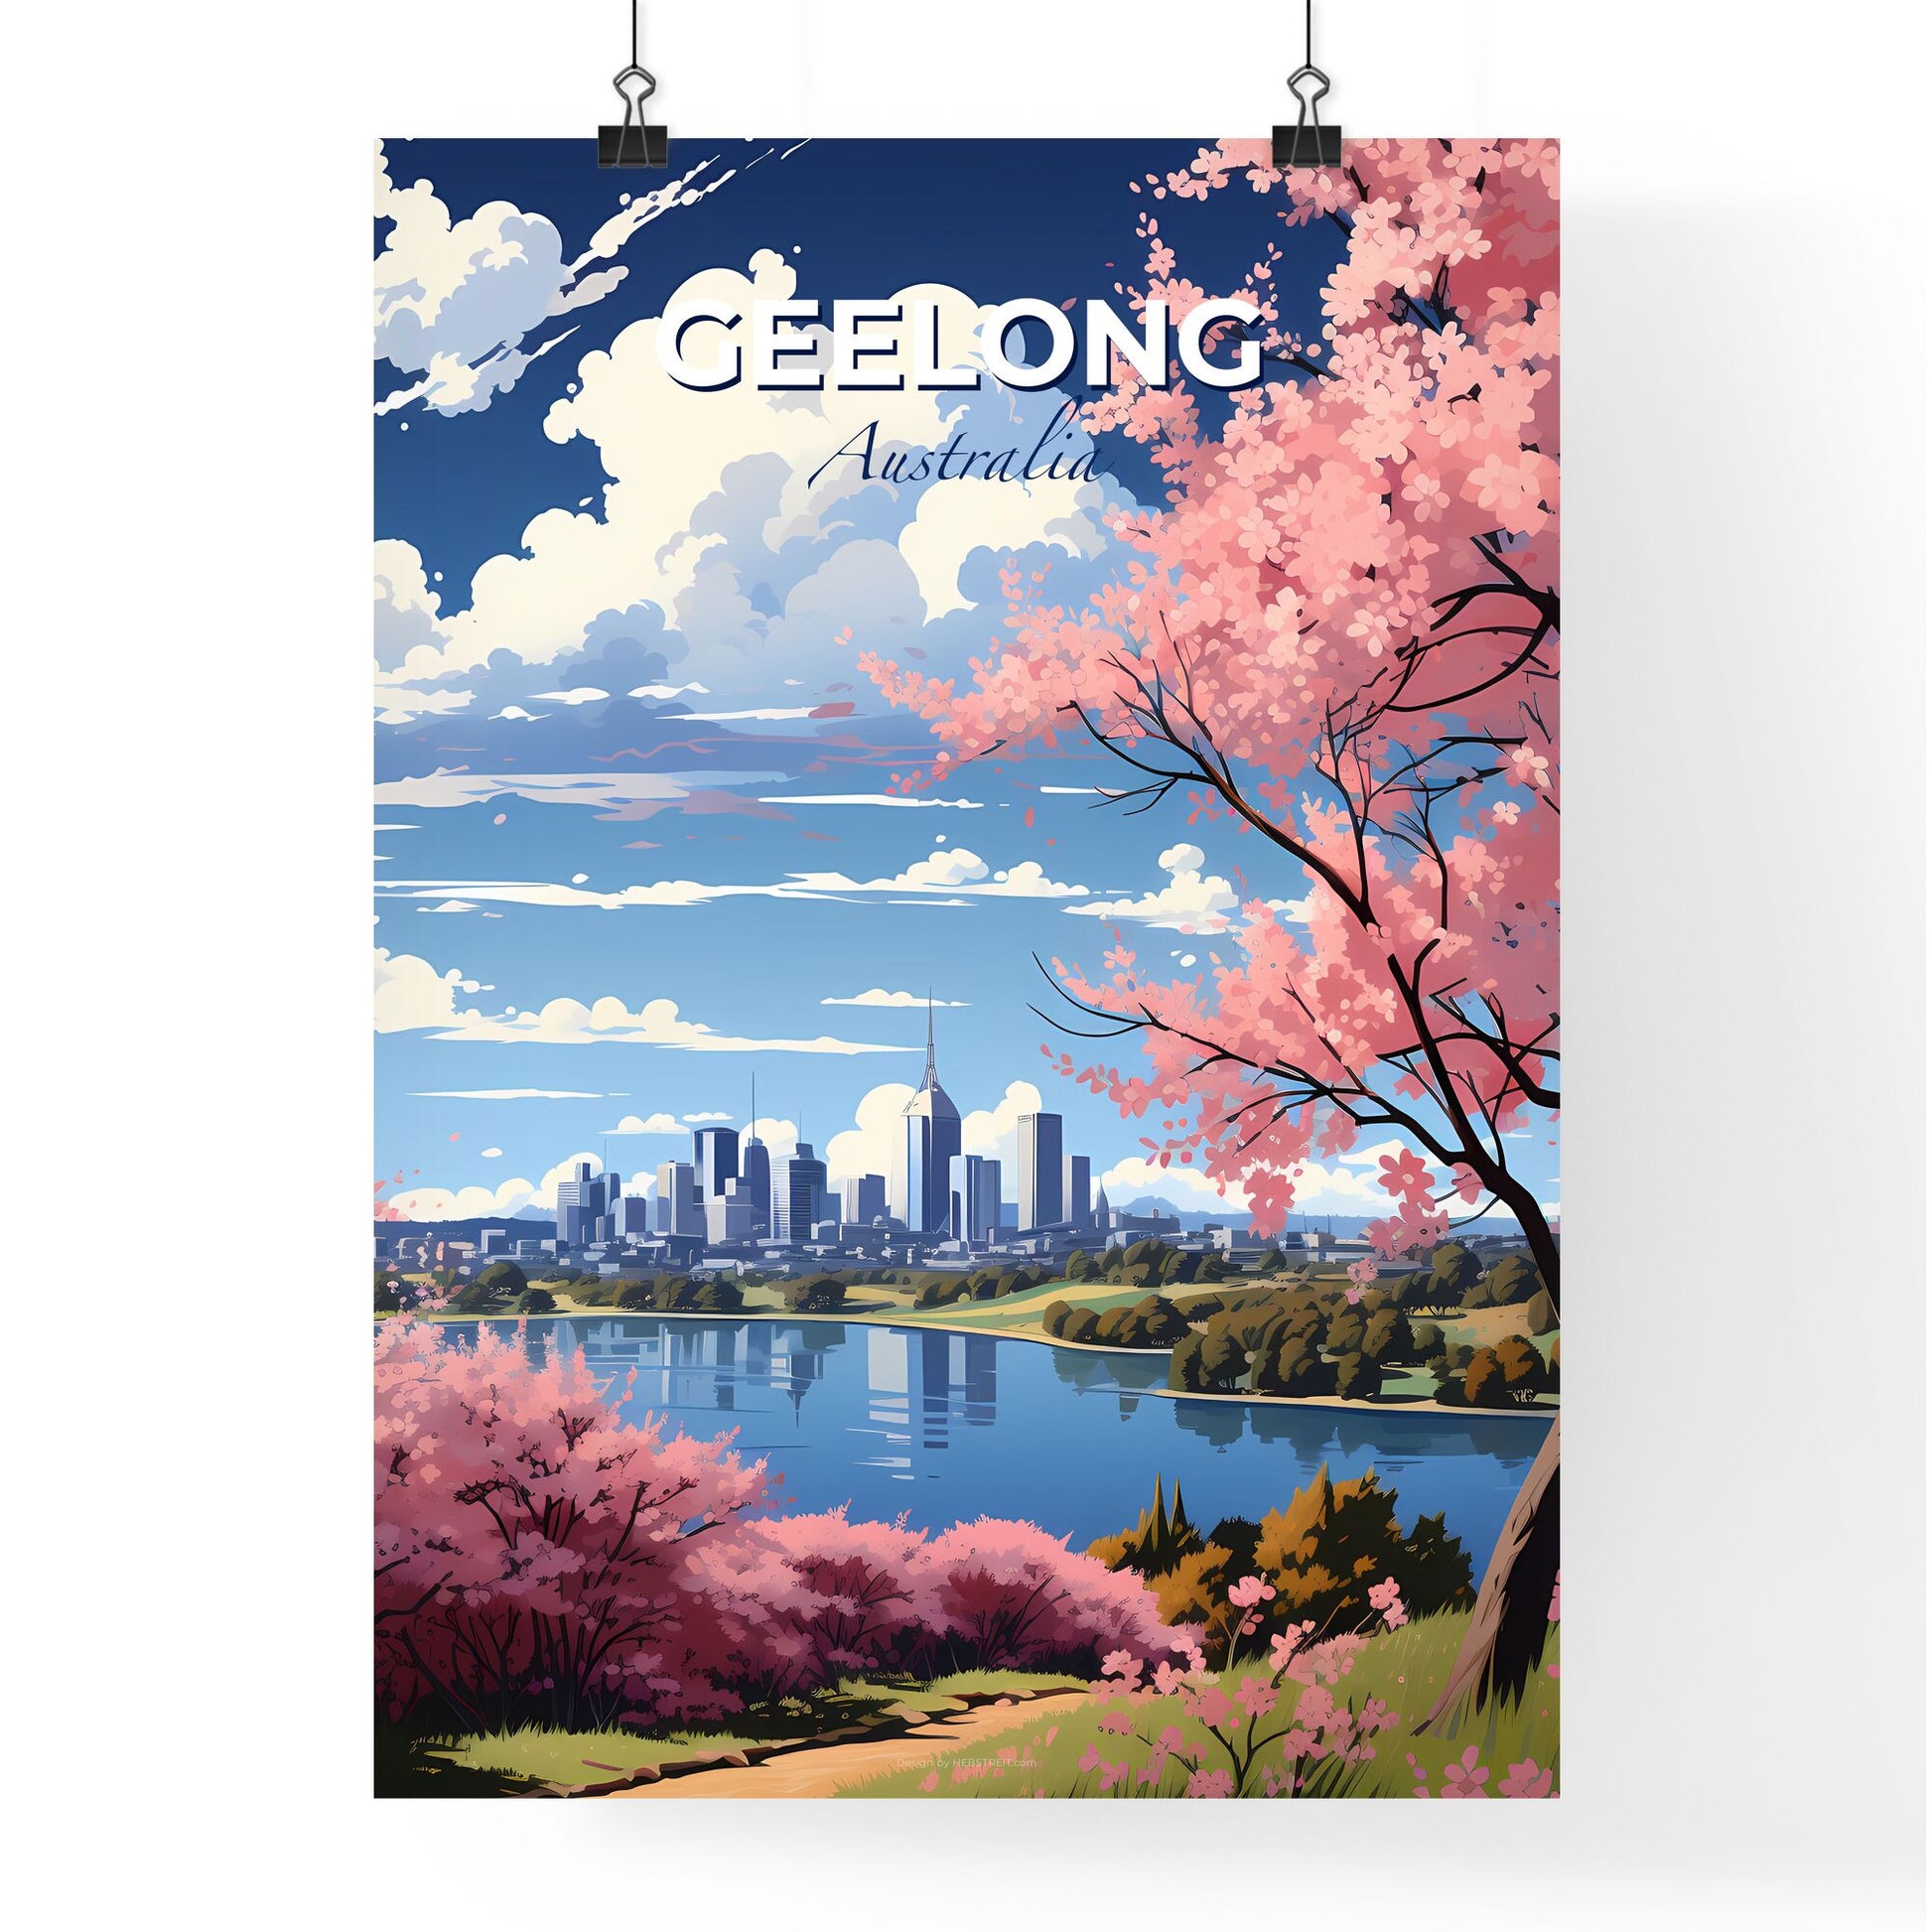 Striking Cityscape Painting of Geelong Skyline with Pink Blossoms by Water Default Title